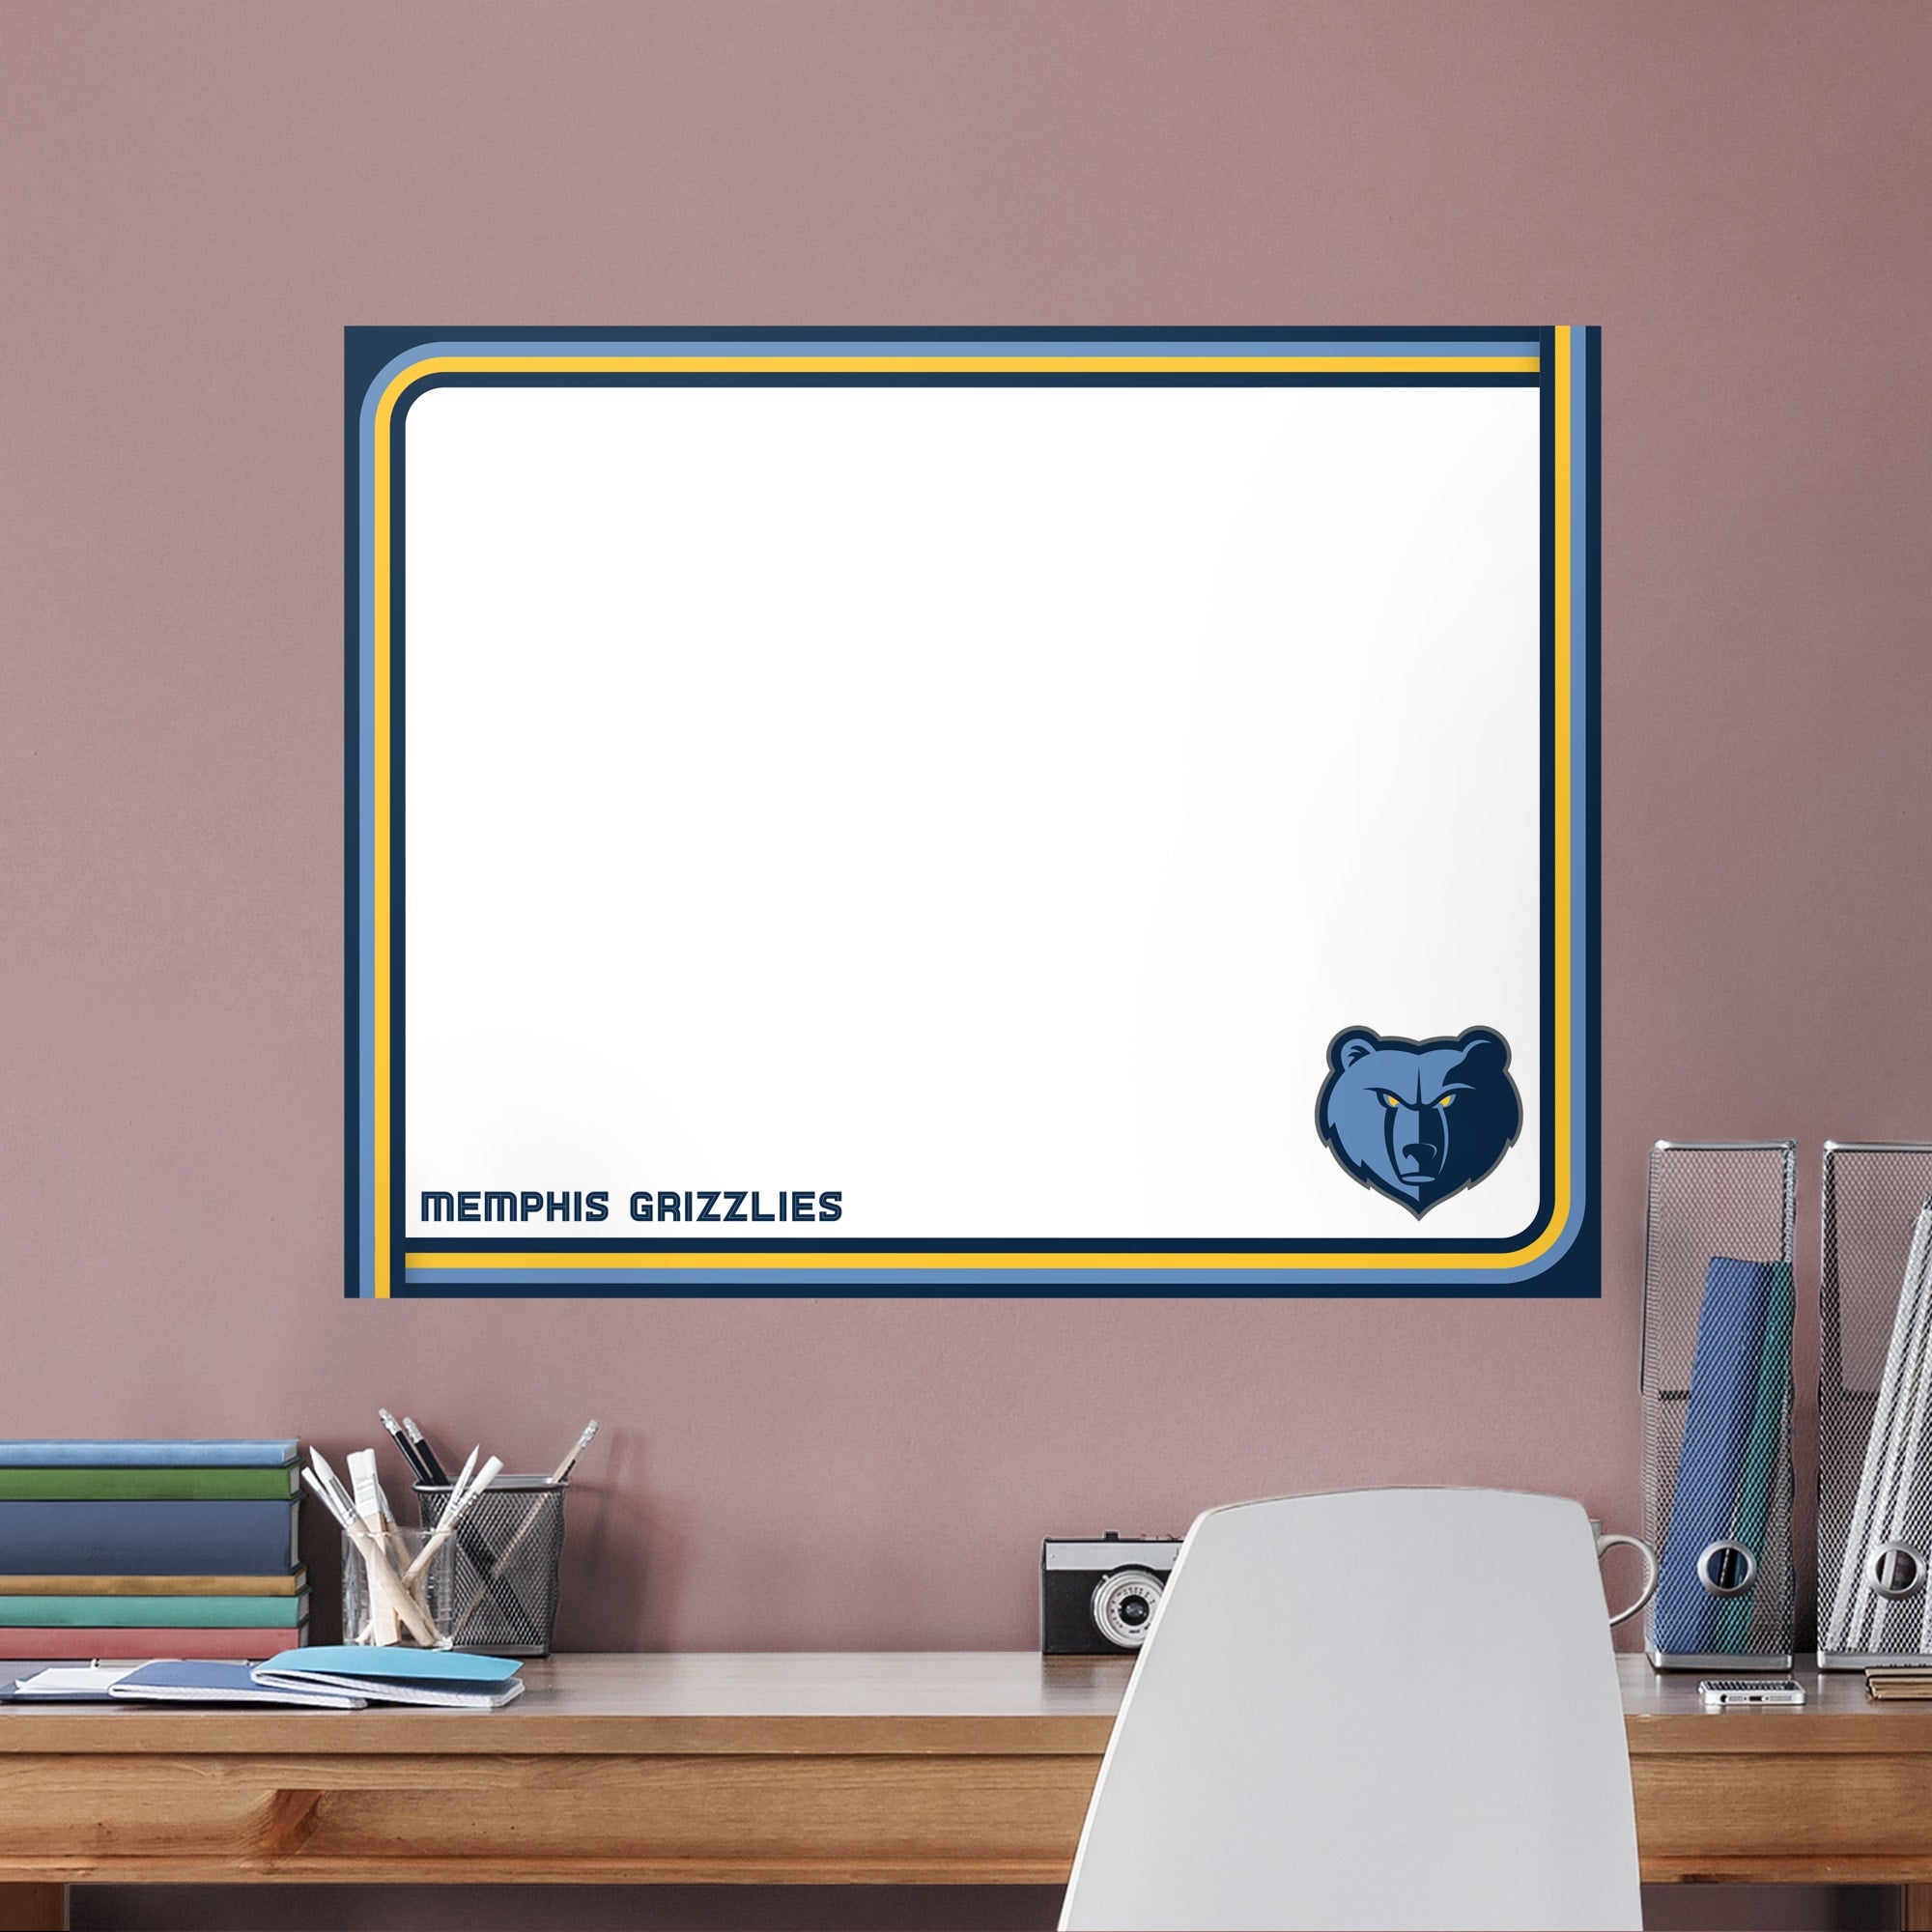 Memphis Grizzlies for Memphis Grizzlies: Dry Erase Whiteboard - Officially Licensed NBA Removable Wall Decal XL by Fathead | Vin